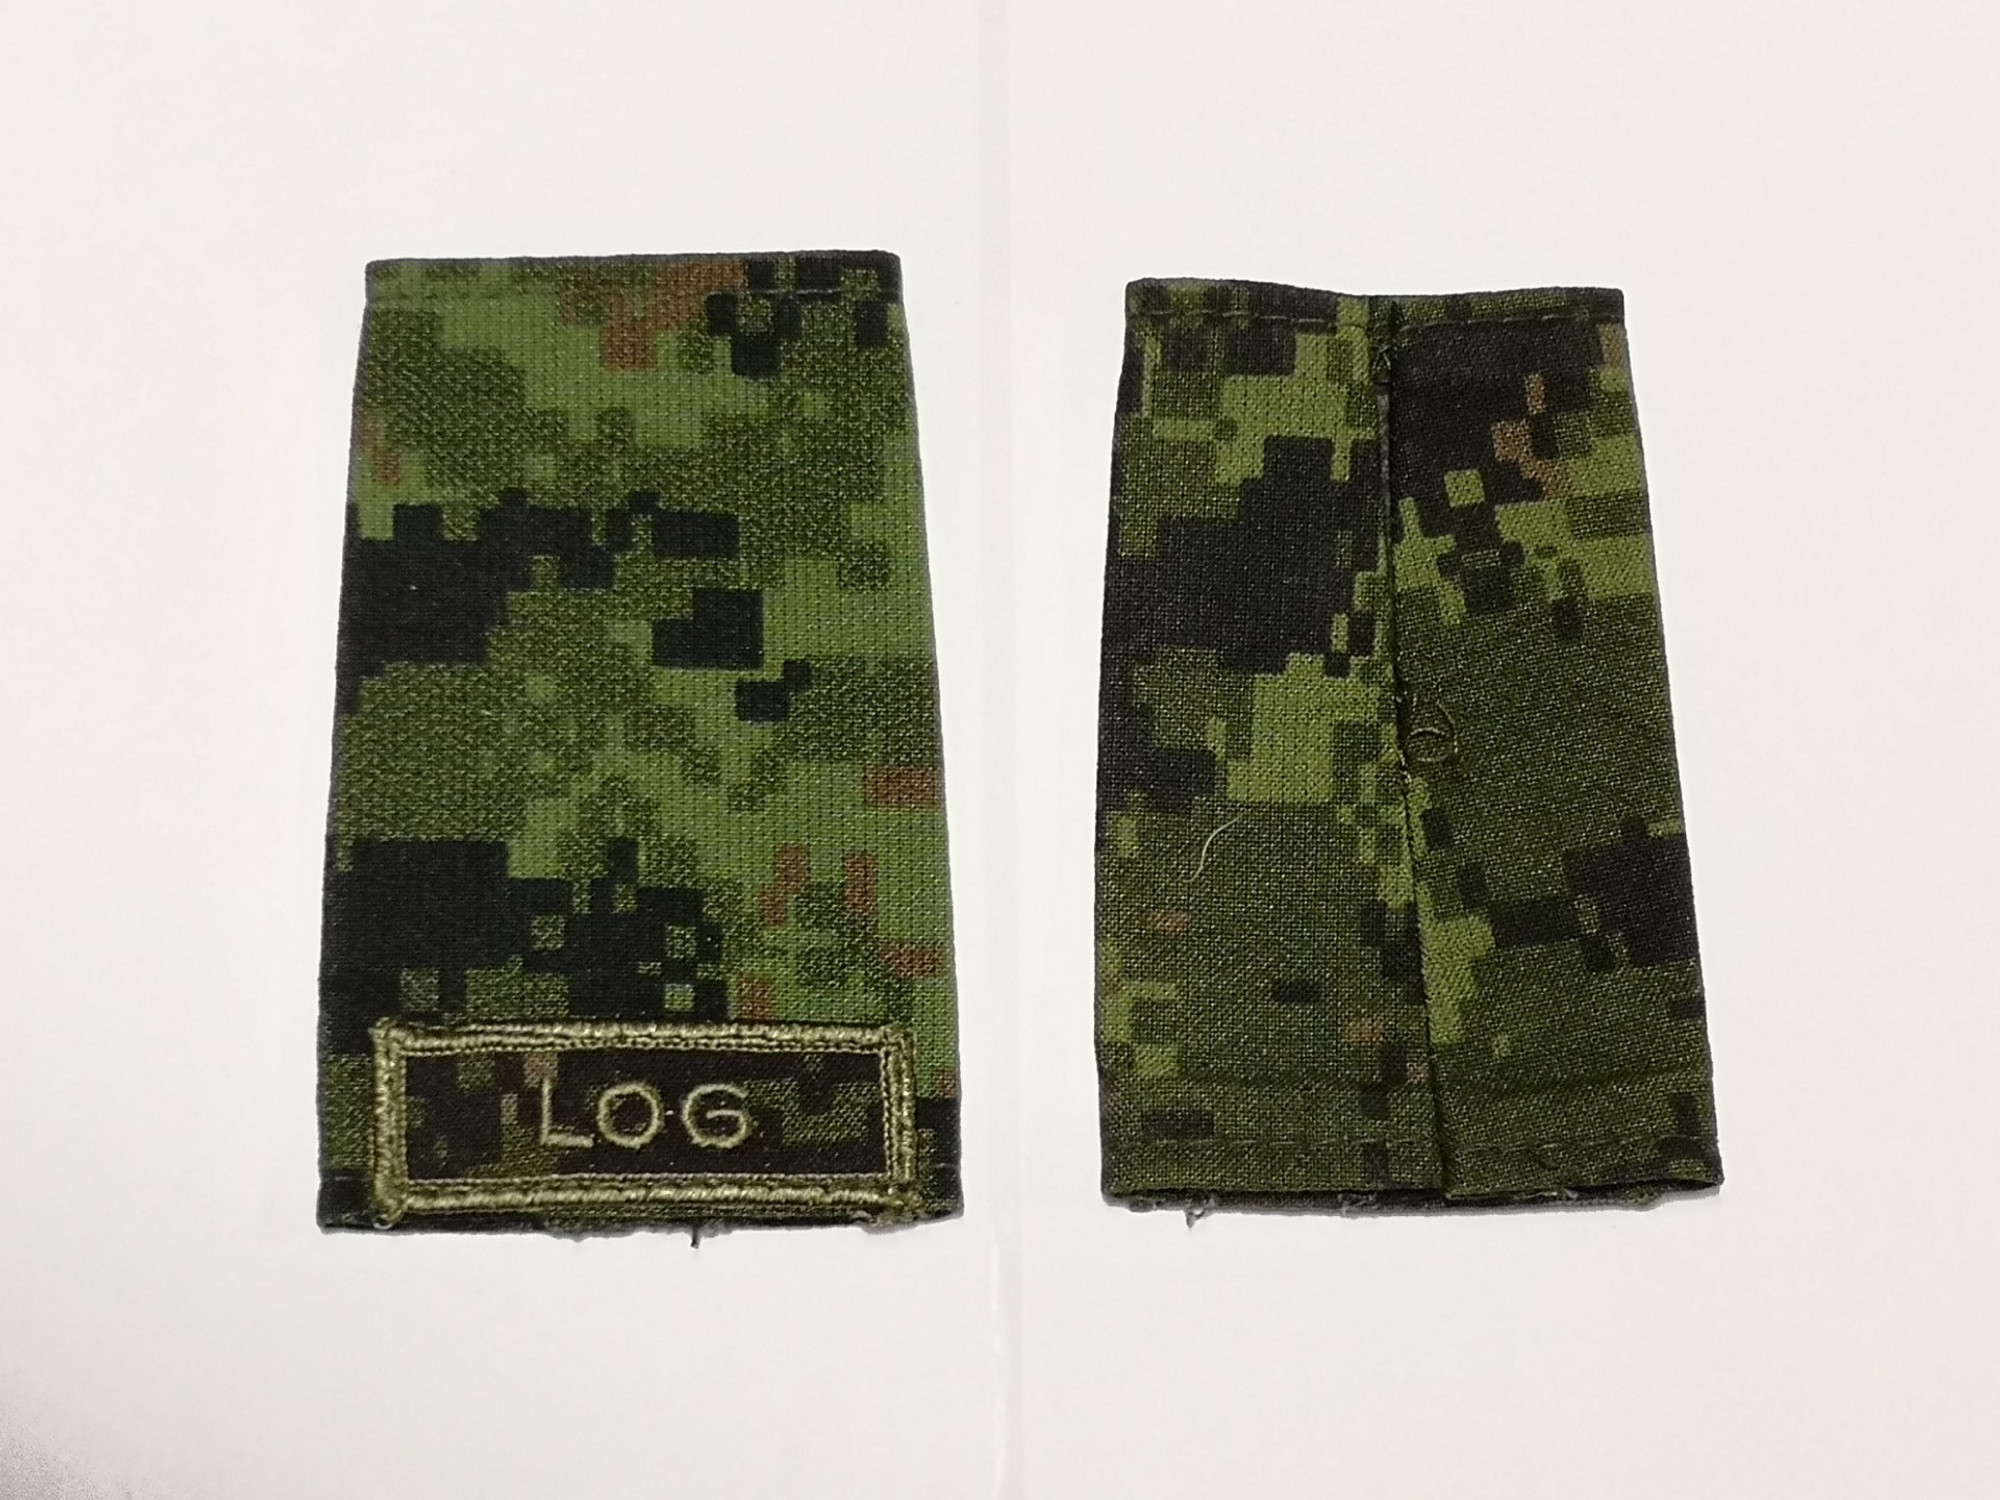 Canadian Armed Forces Cadpat Rank Epaulets LOG - Private (Basic)